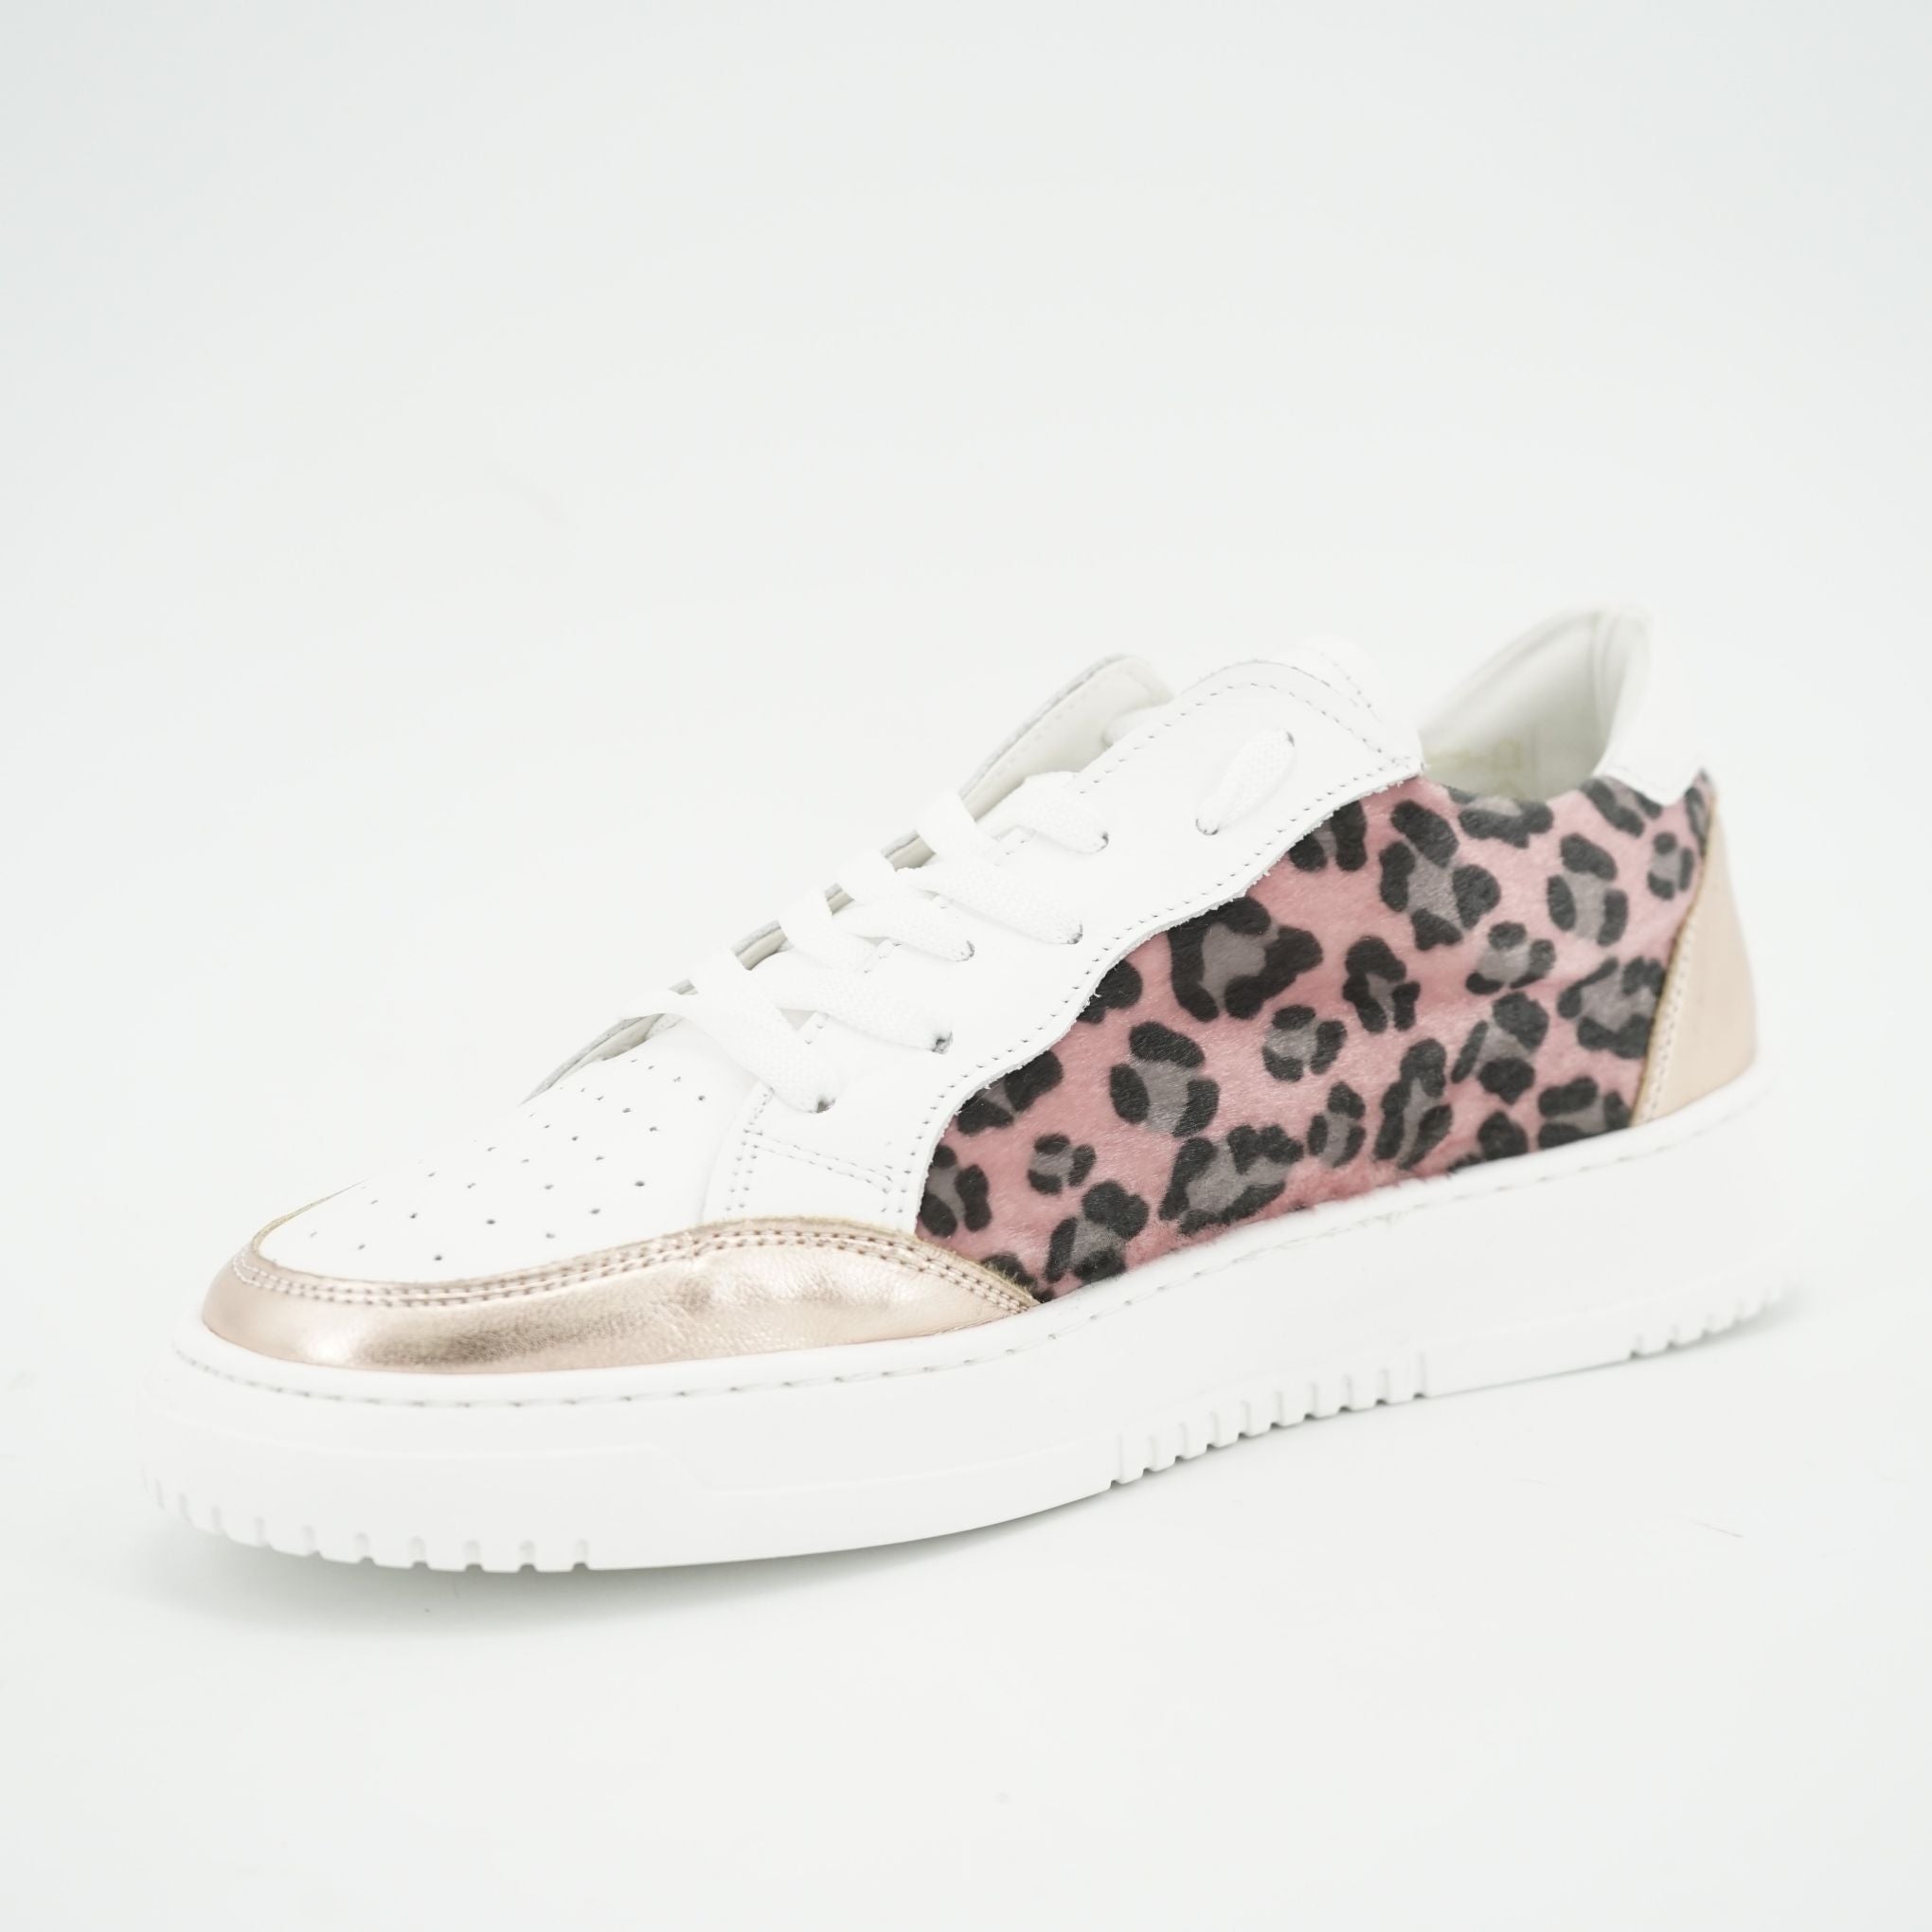 Sneakers stringate a fantasia maculato in pelle: SN 04 MACULATO